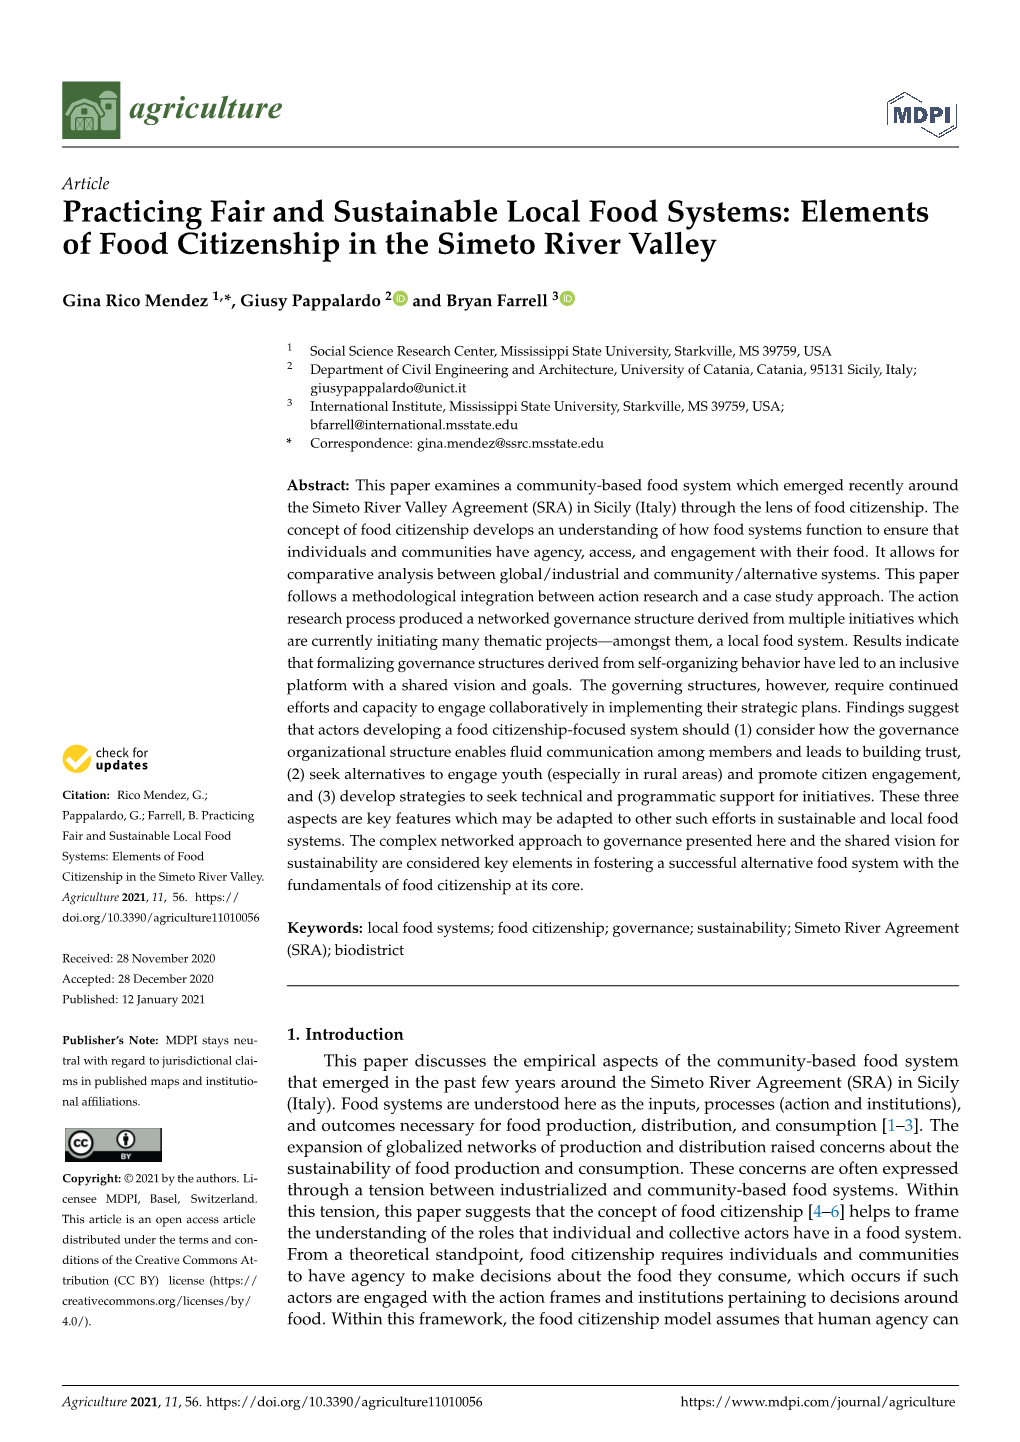 Practicing Fair and Sustainable Local Food Systems: Elements of Food Citizenship in the Simeto River Valley